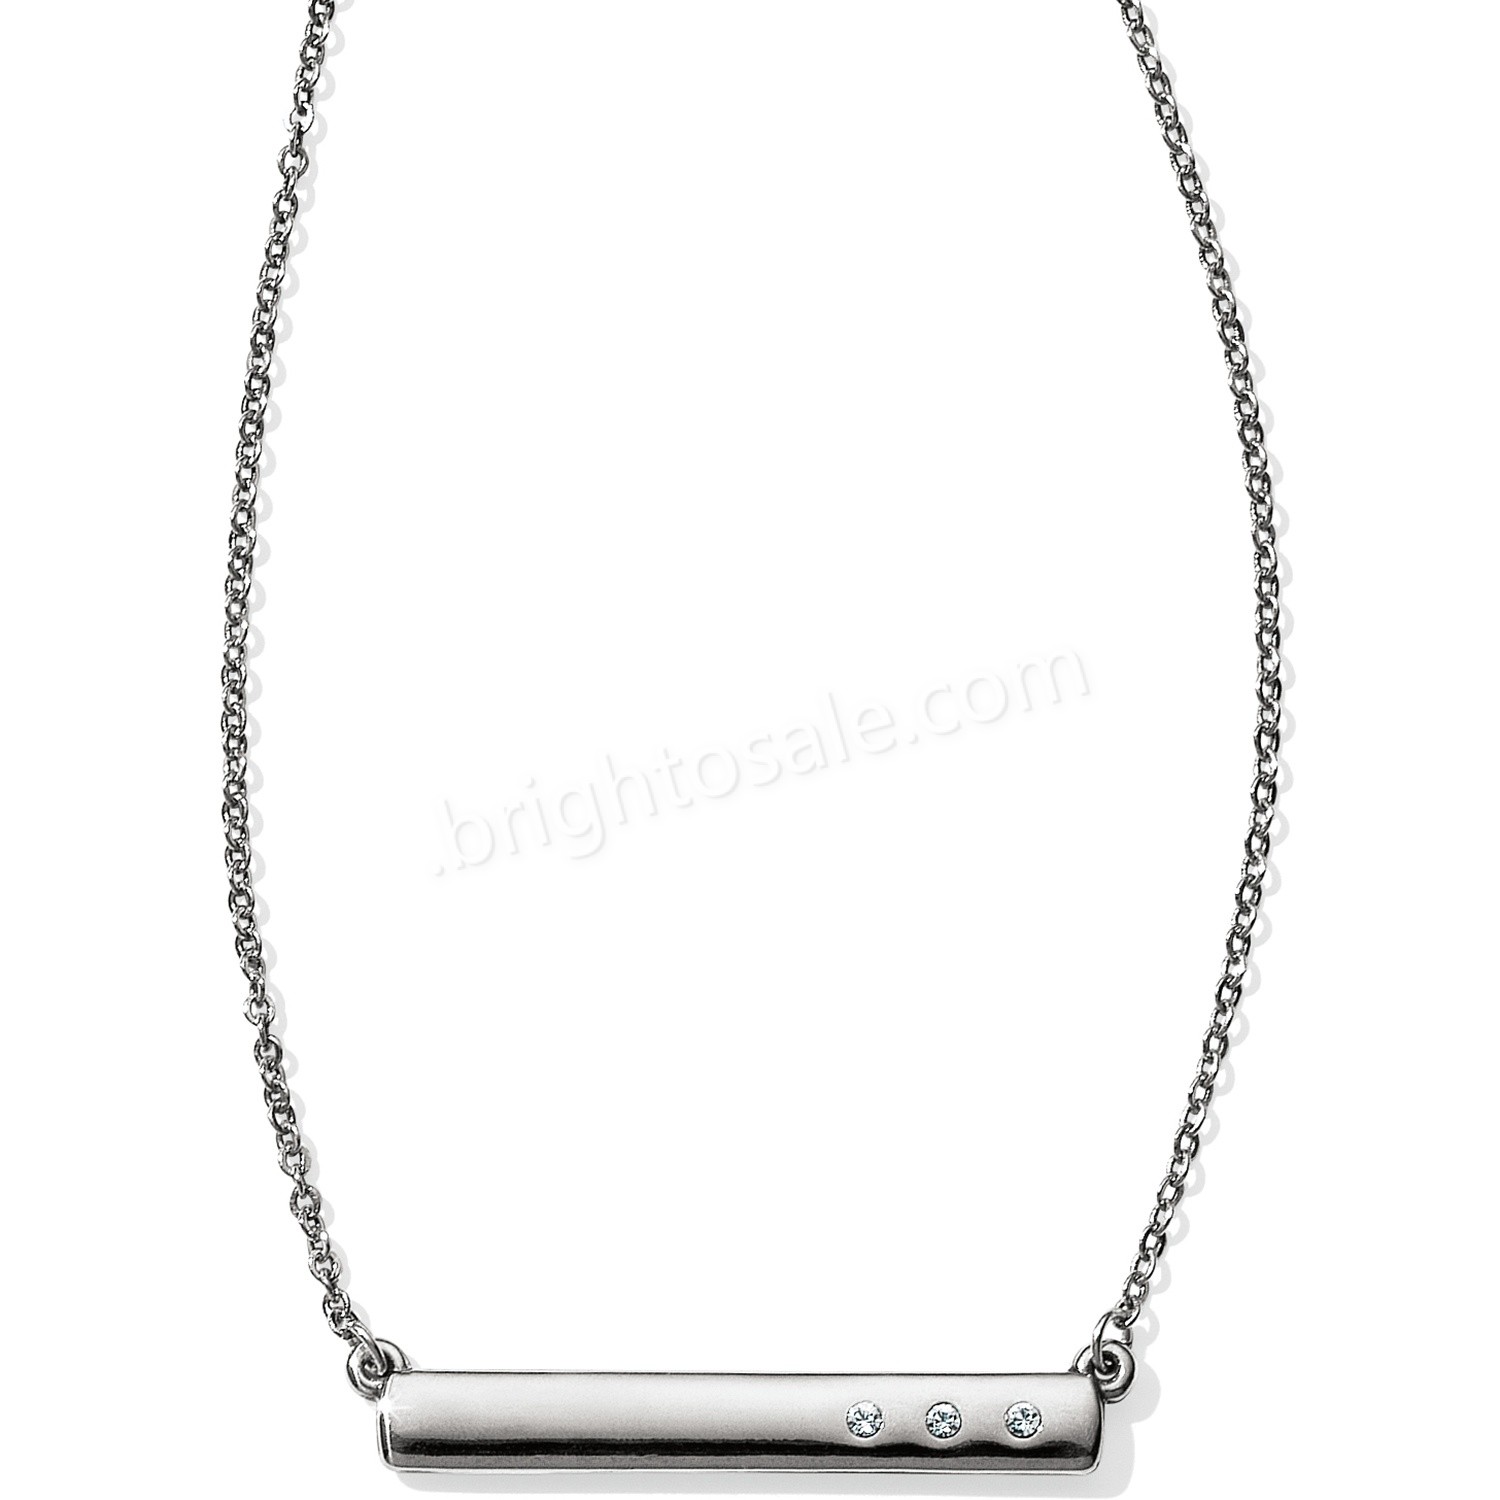 Brighton Collectibles & Online Discount London Groove Mini Bar Reversible Necklace - Brighton Collectibles & Online Discount London Groove Mini Bar Reversible Necklace